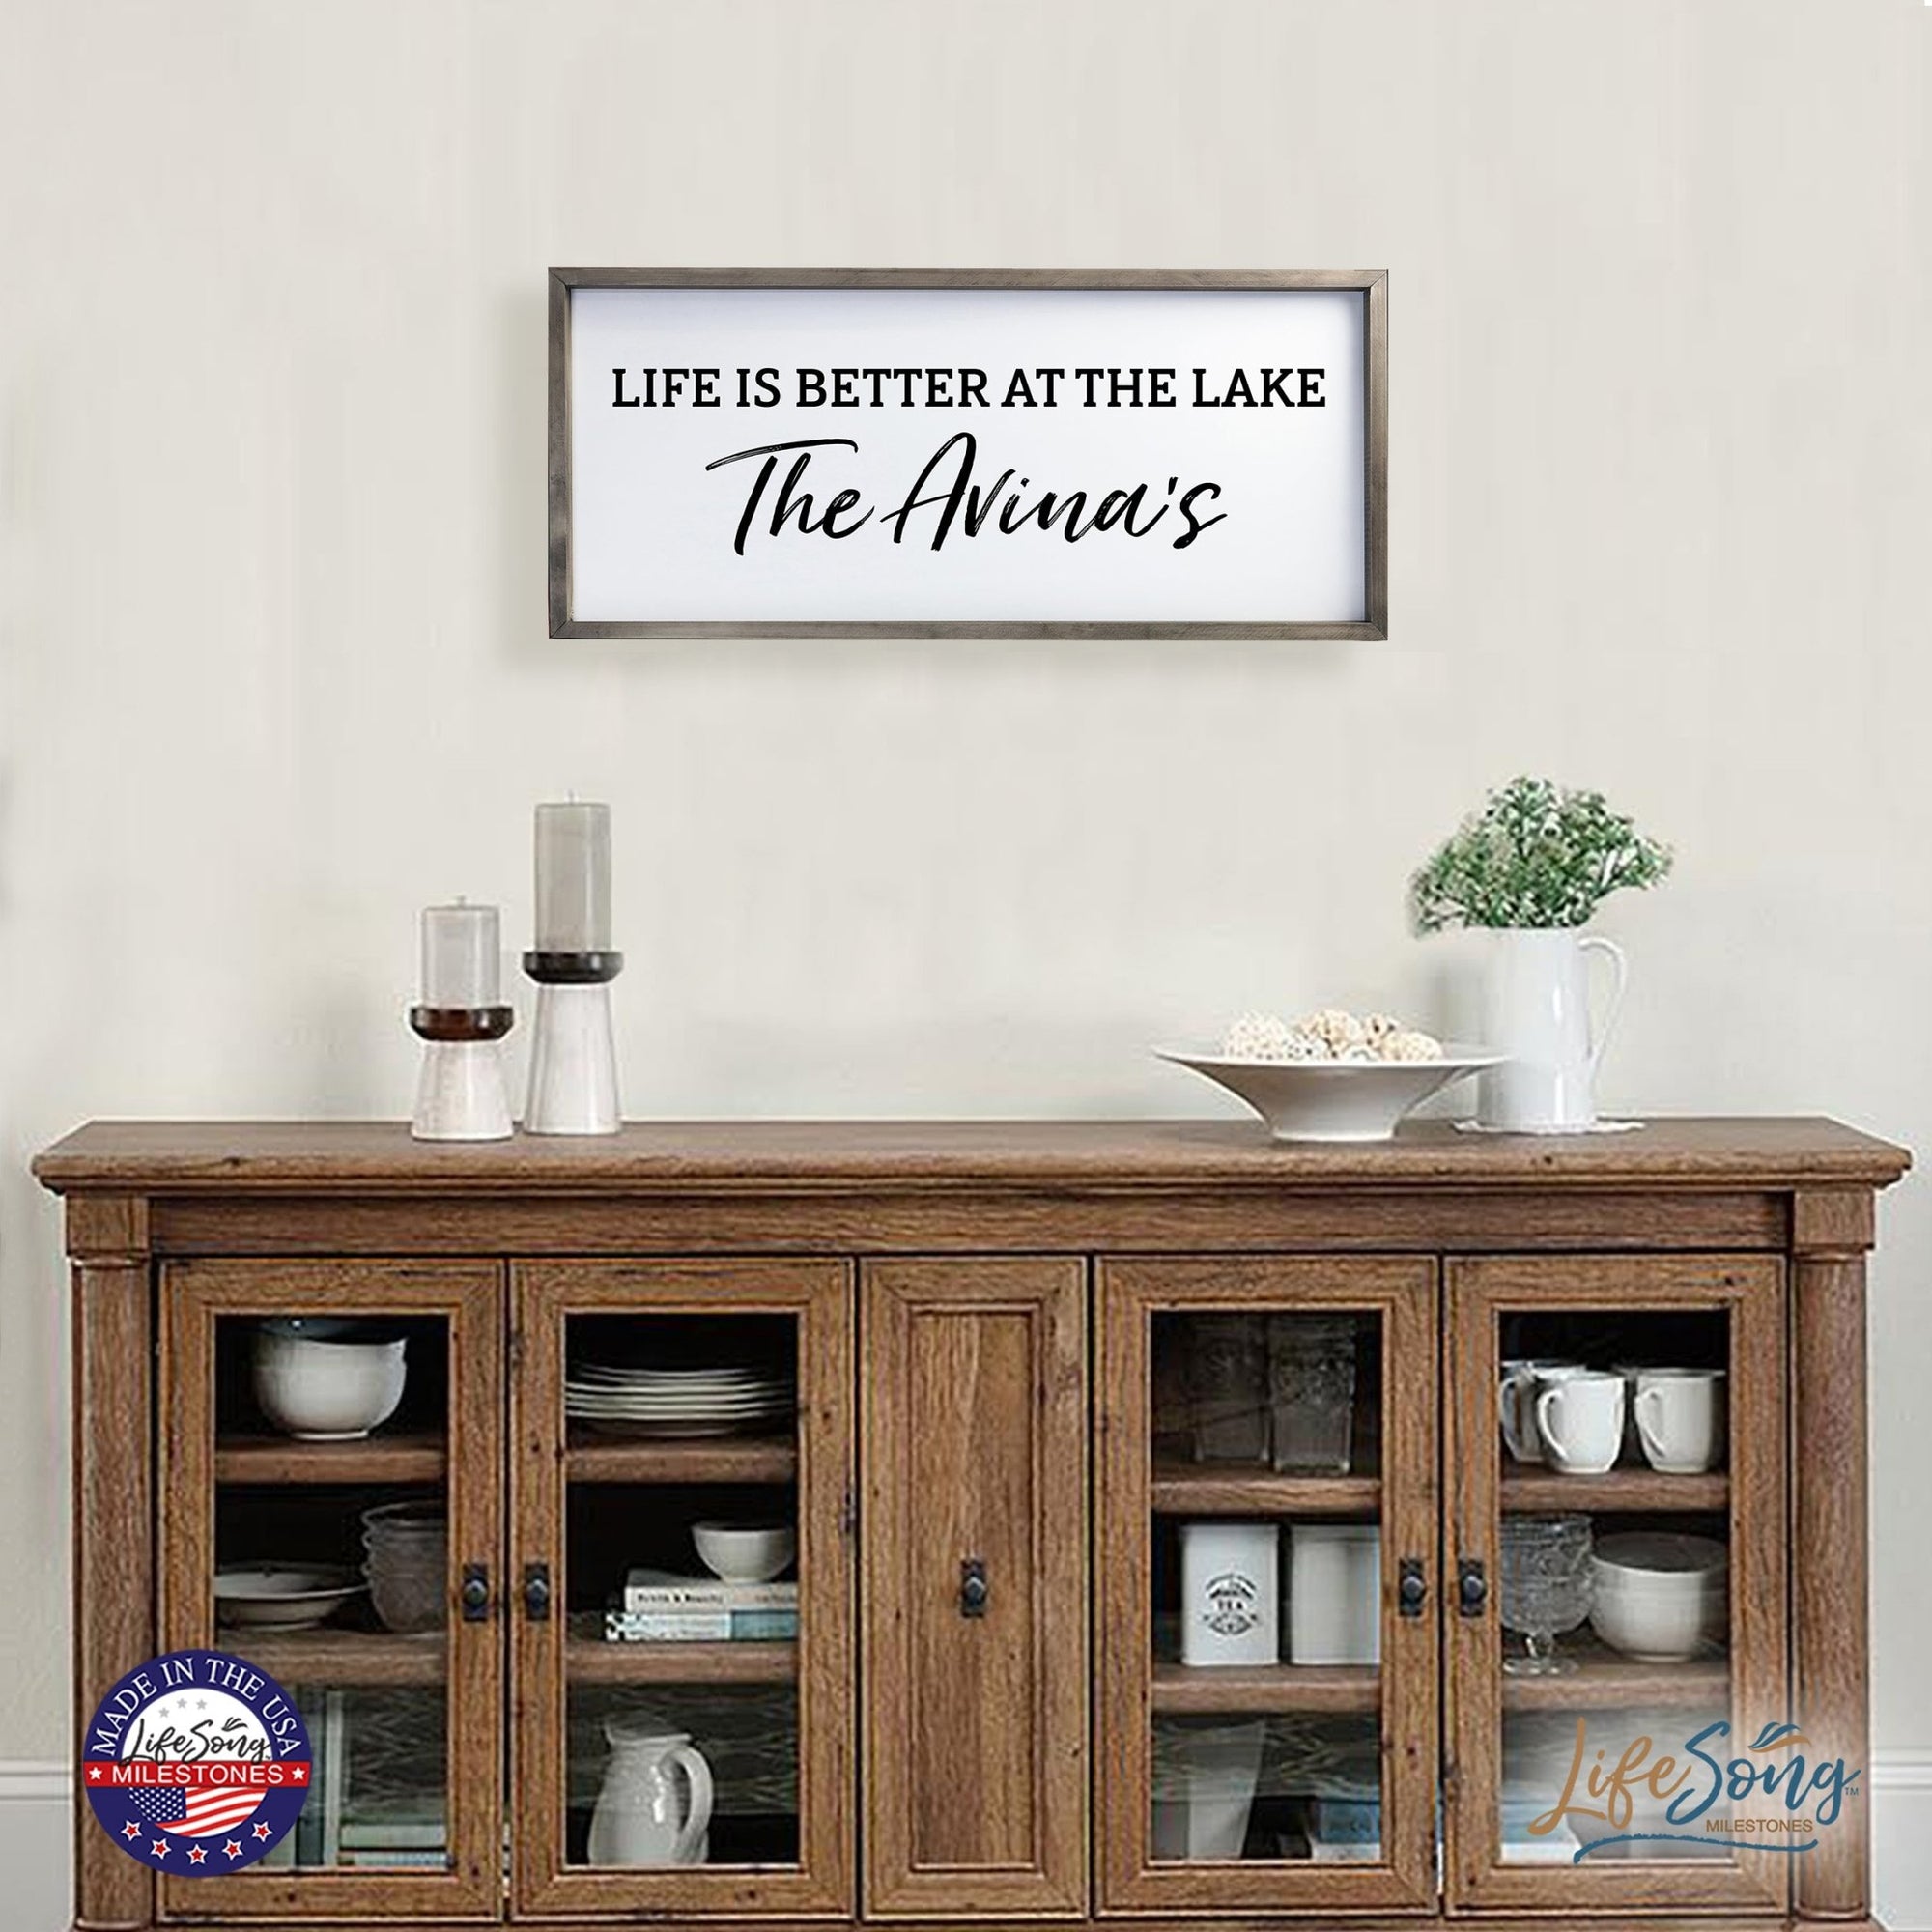 Inspirational Personalized Framed Shadow Box 13x30 - Life is Better at the Lake - LifeSong Milestones